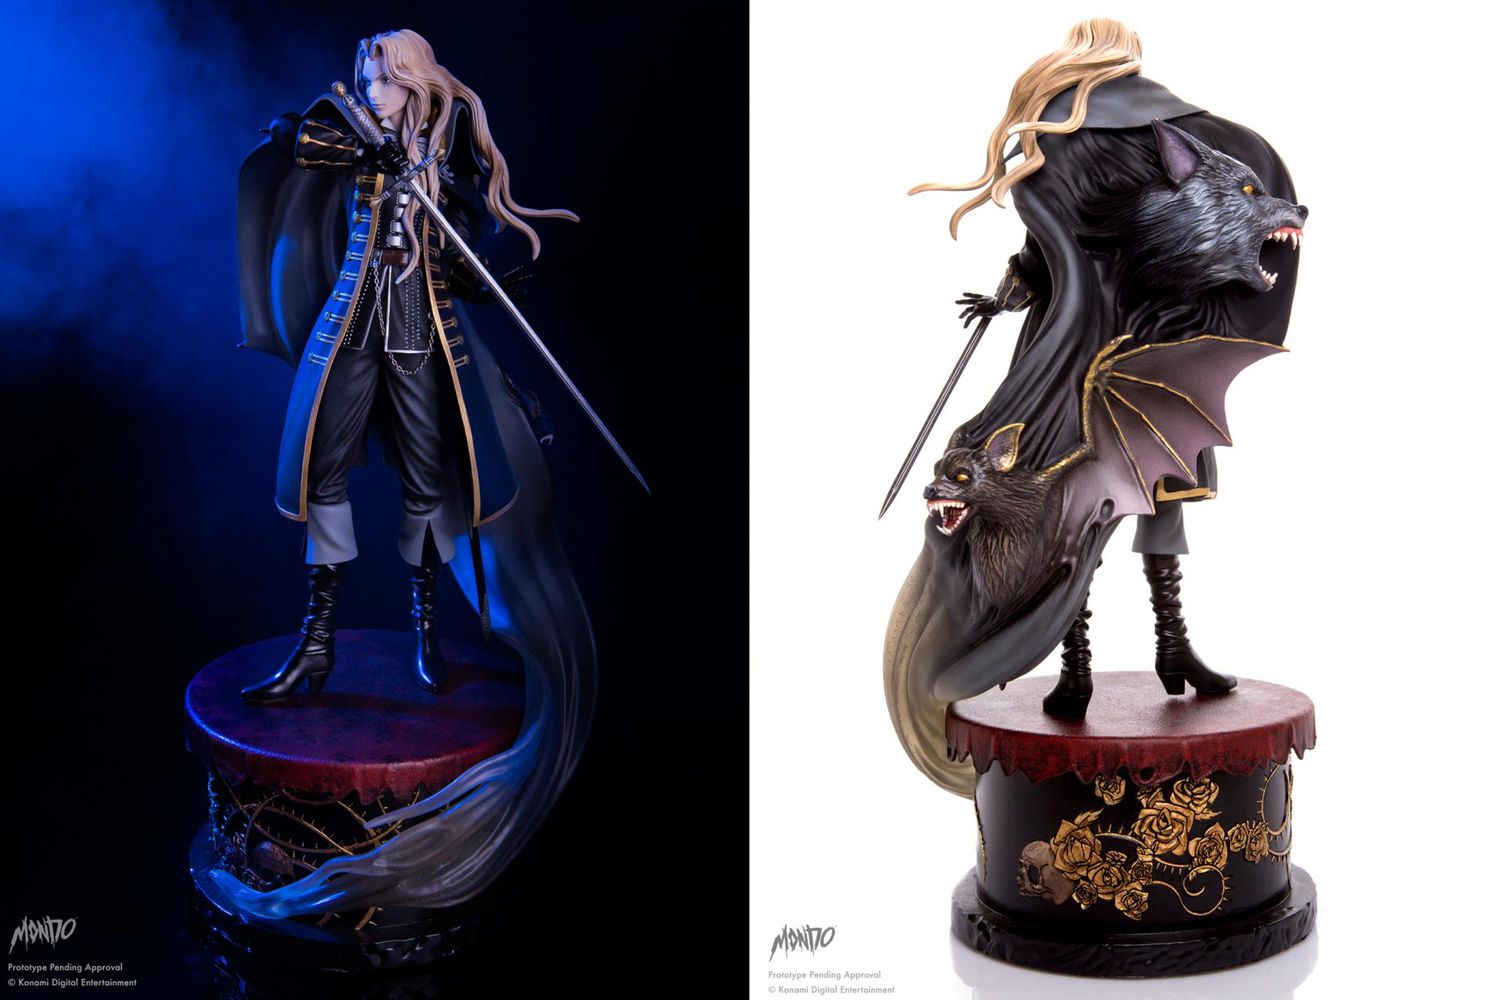 Alucard from Castlevania: Symphony of the Night statue